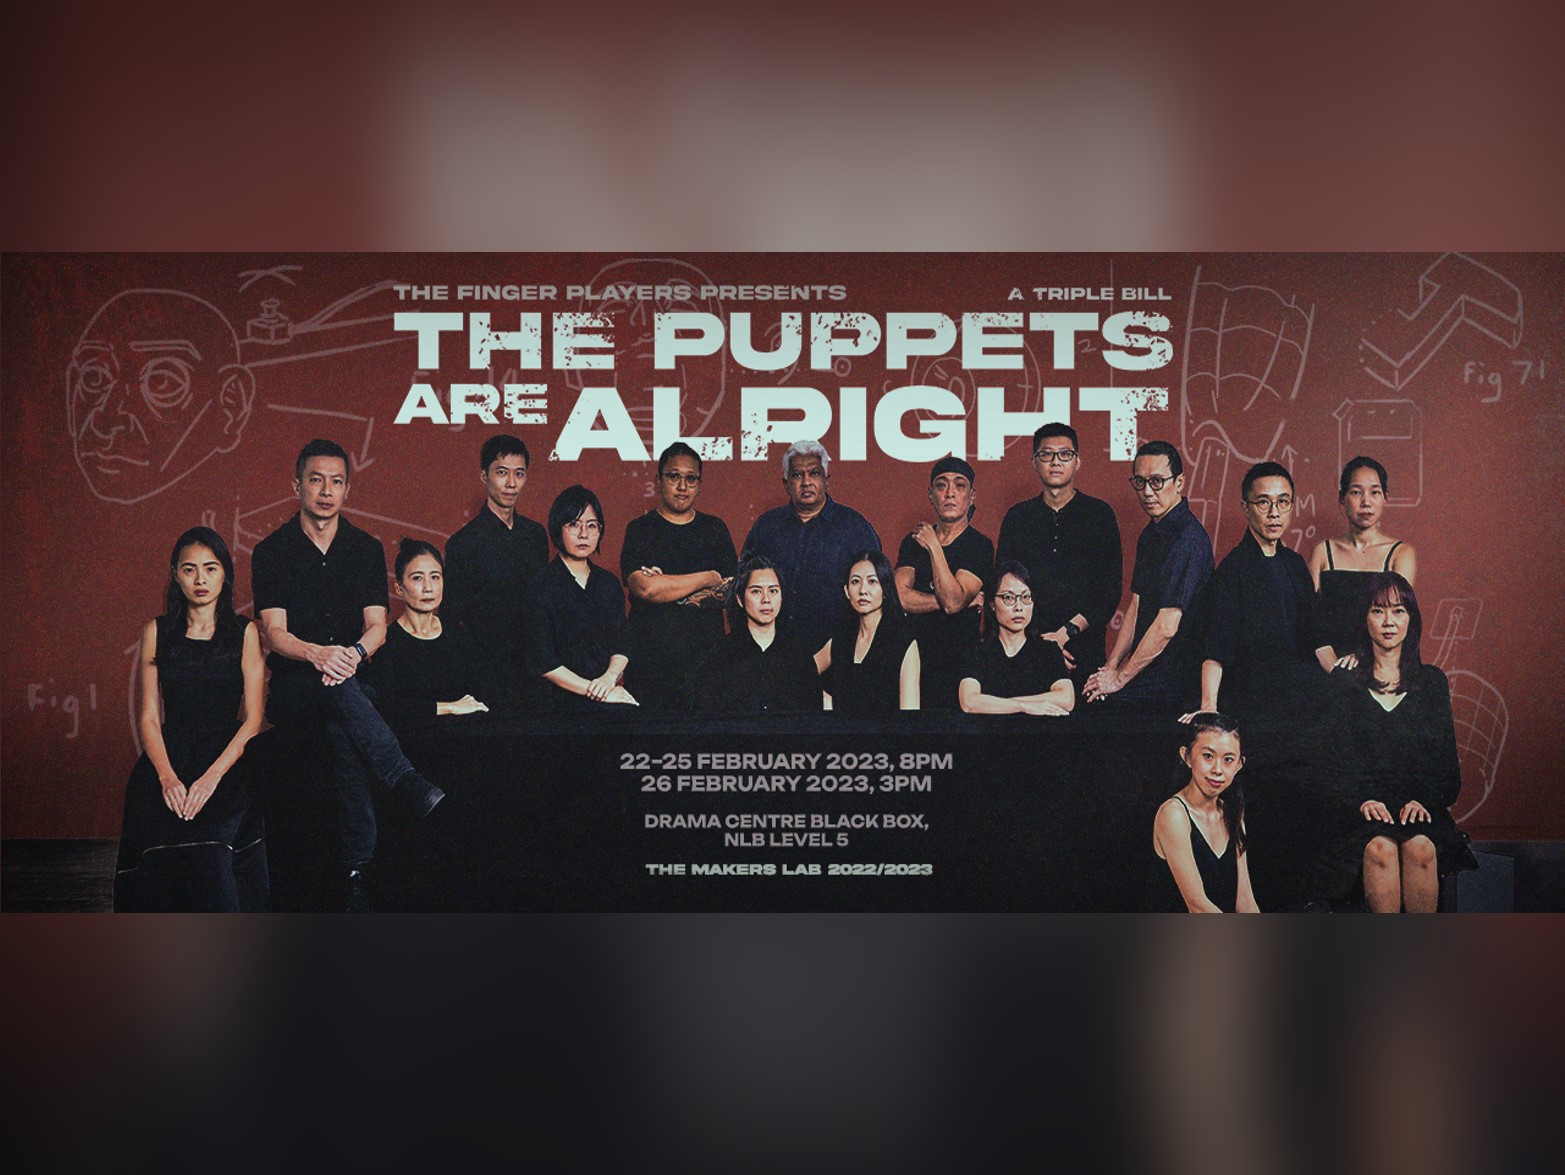 The Puppets Are Alright